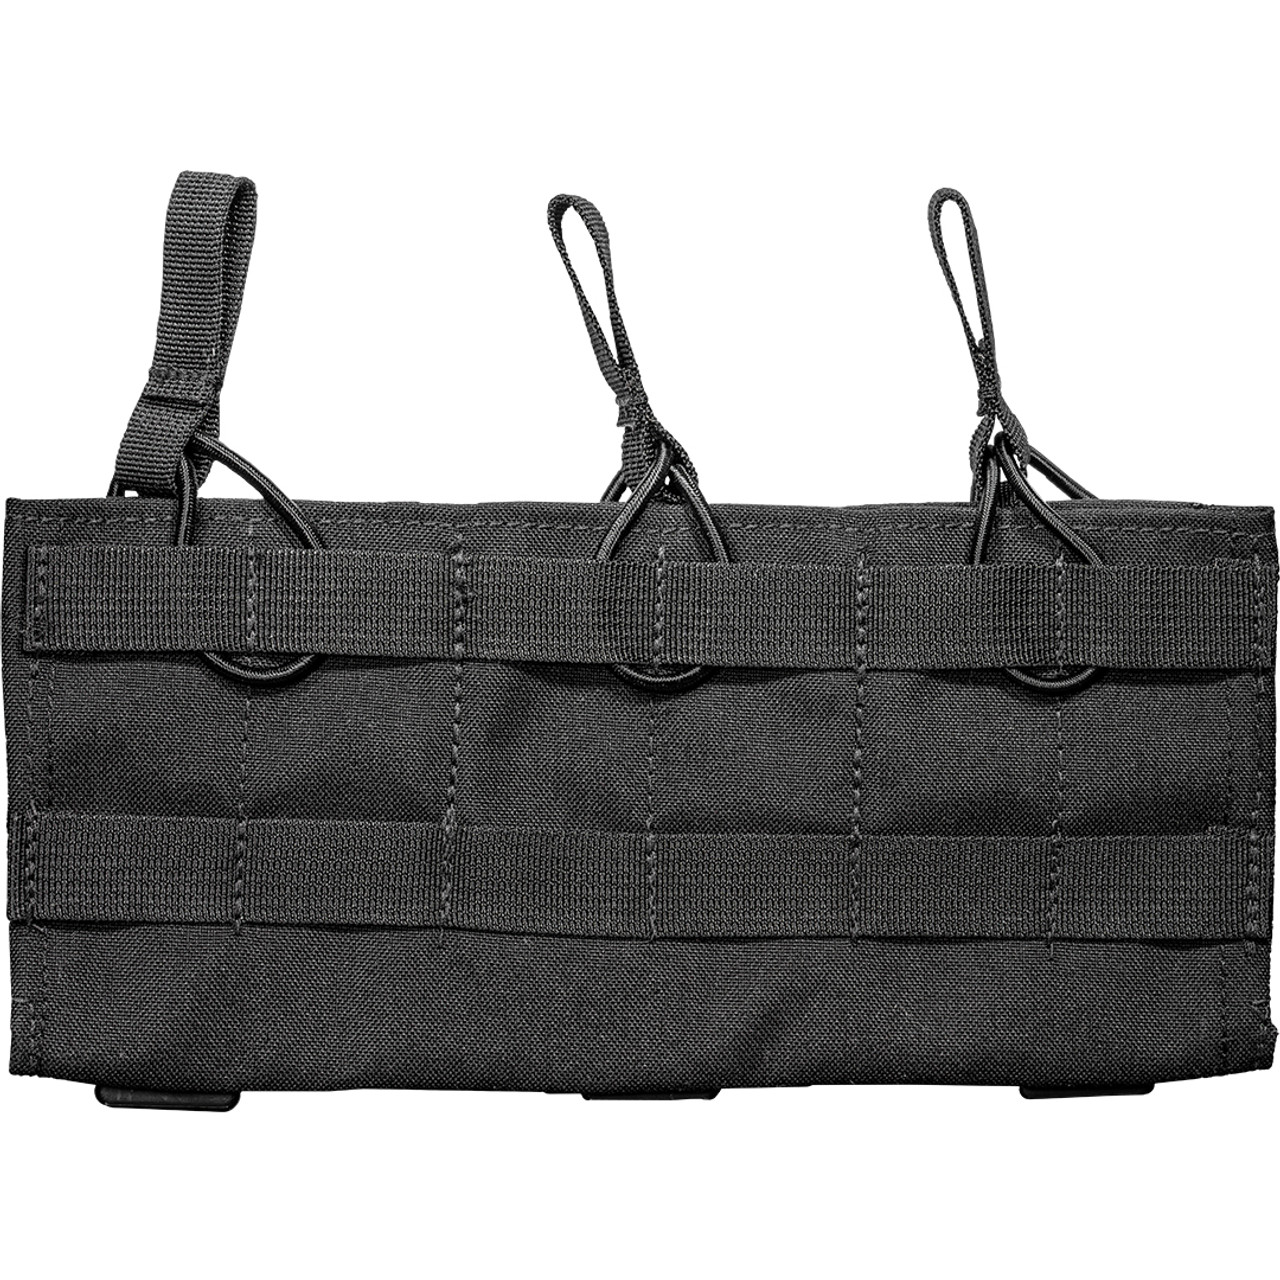 Tactical Tailor Fight Light 5.56 Triple Mag Panel (Color: Multicam Tropic),  Tactical Gear/Apparel, Pouches, Mag Pouches (Rifle, SMG, MG) -   Airsoft Superstore